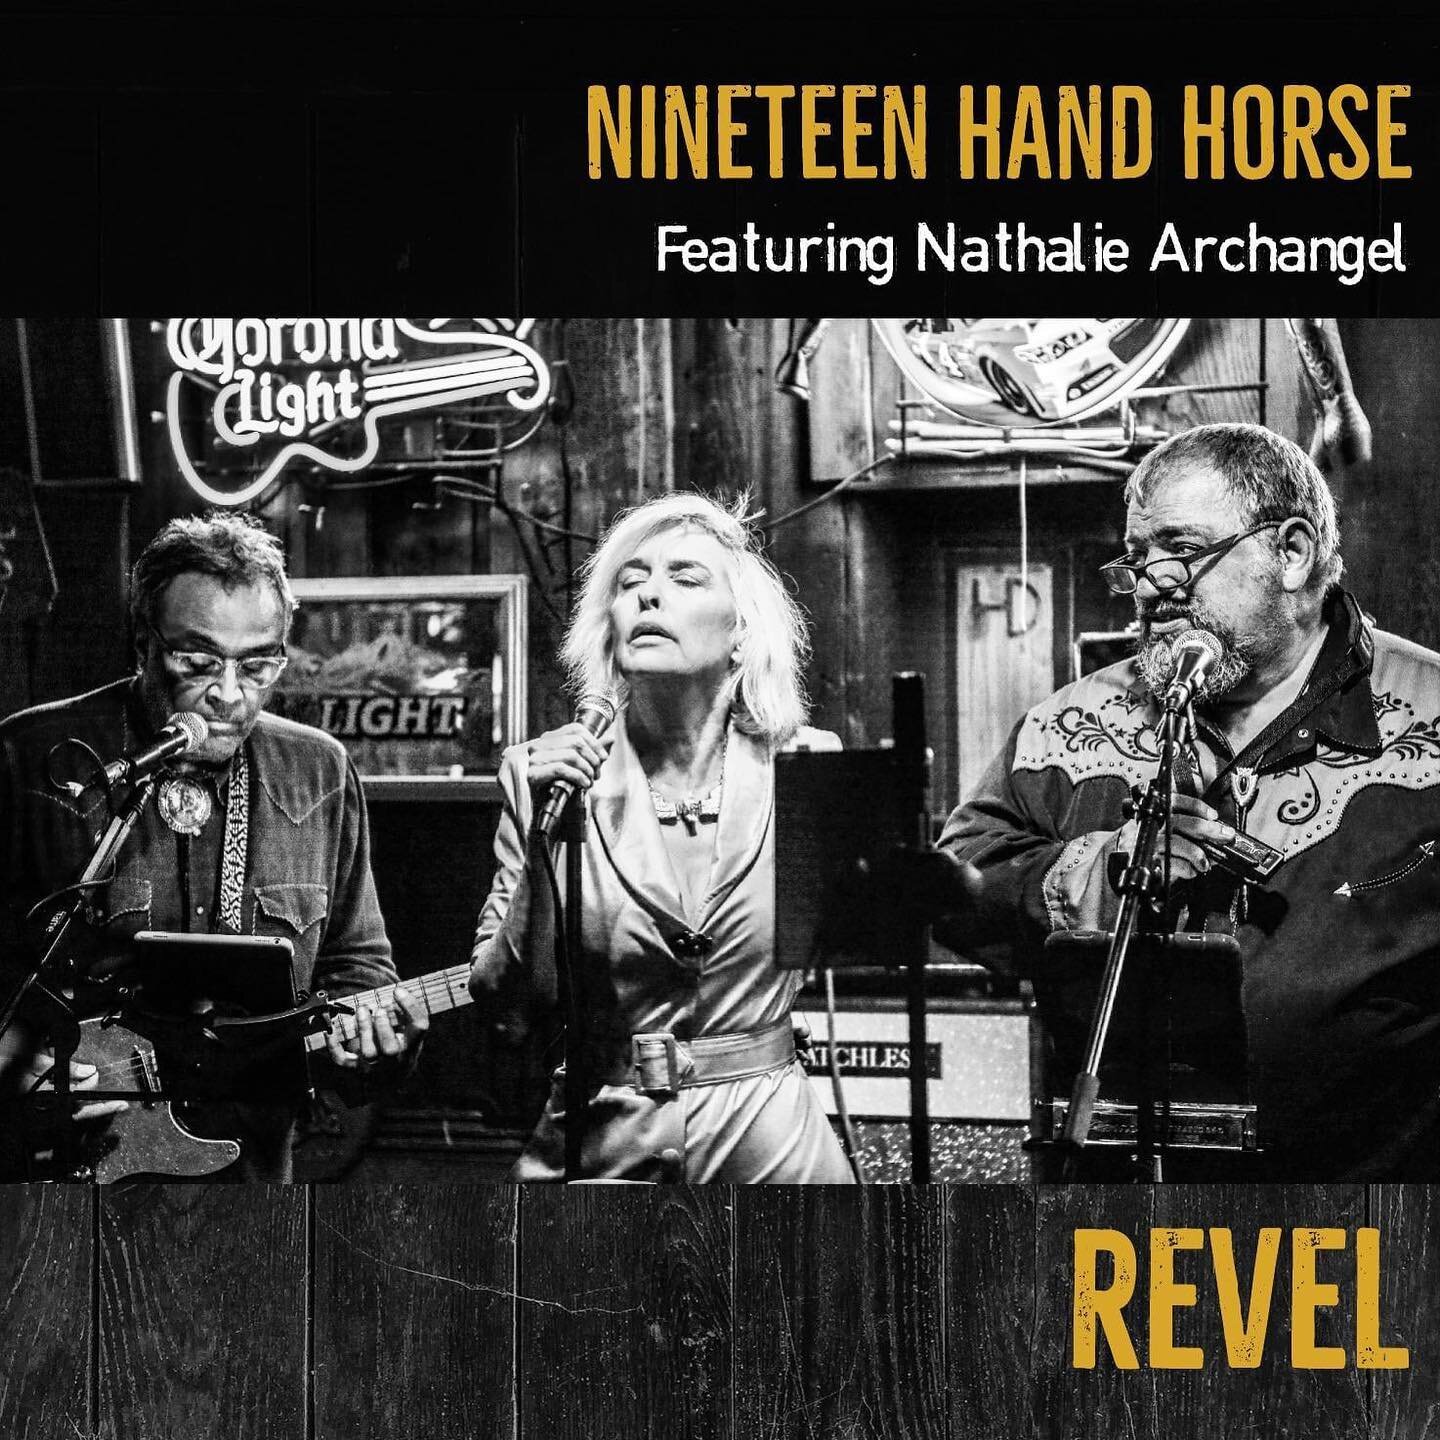 Our debut album #REVEL is now available on all streaming platforms 🎶

and on CD via Amazon 💿 
Link in our bio! ✋🐎